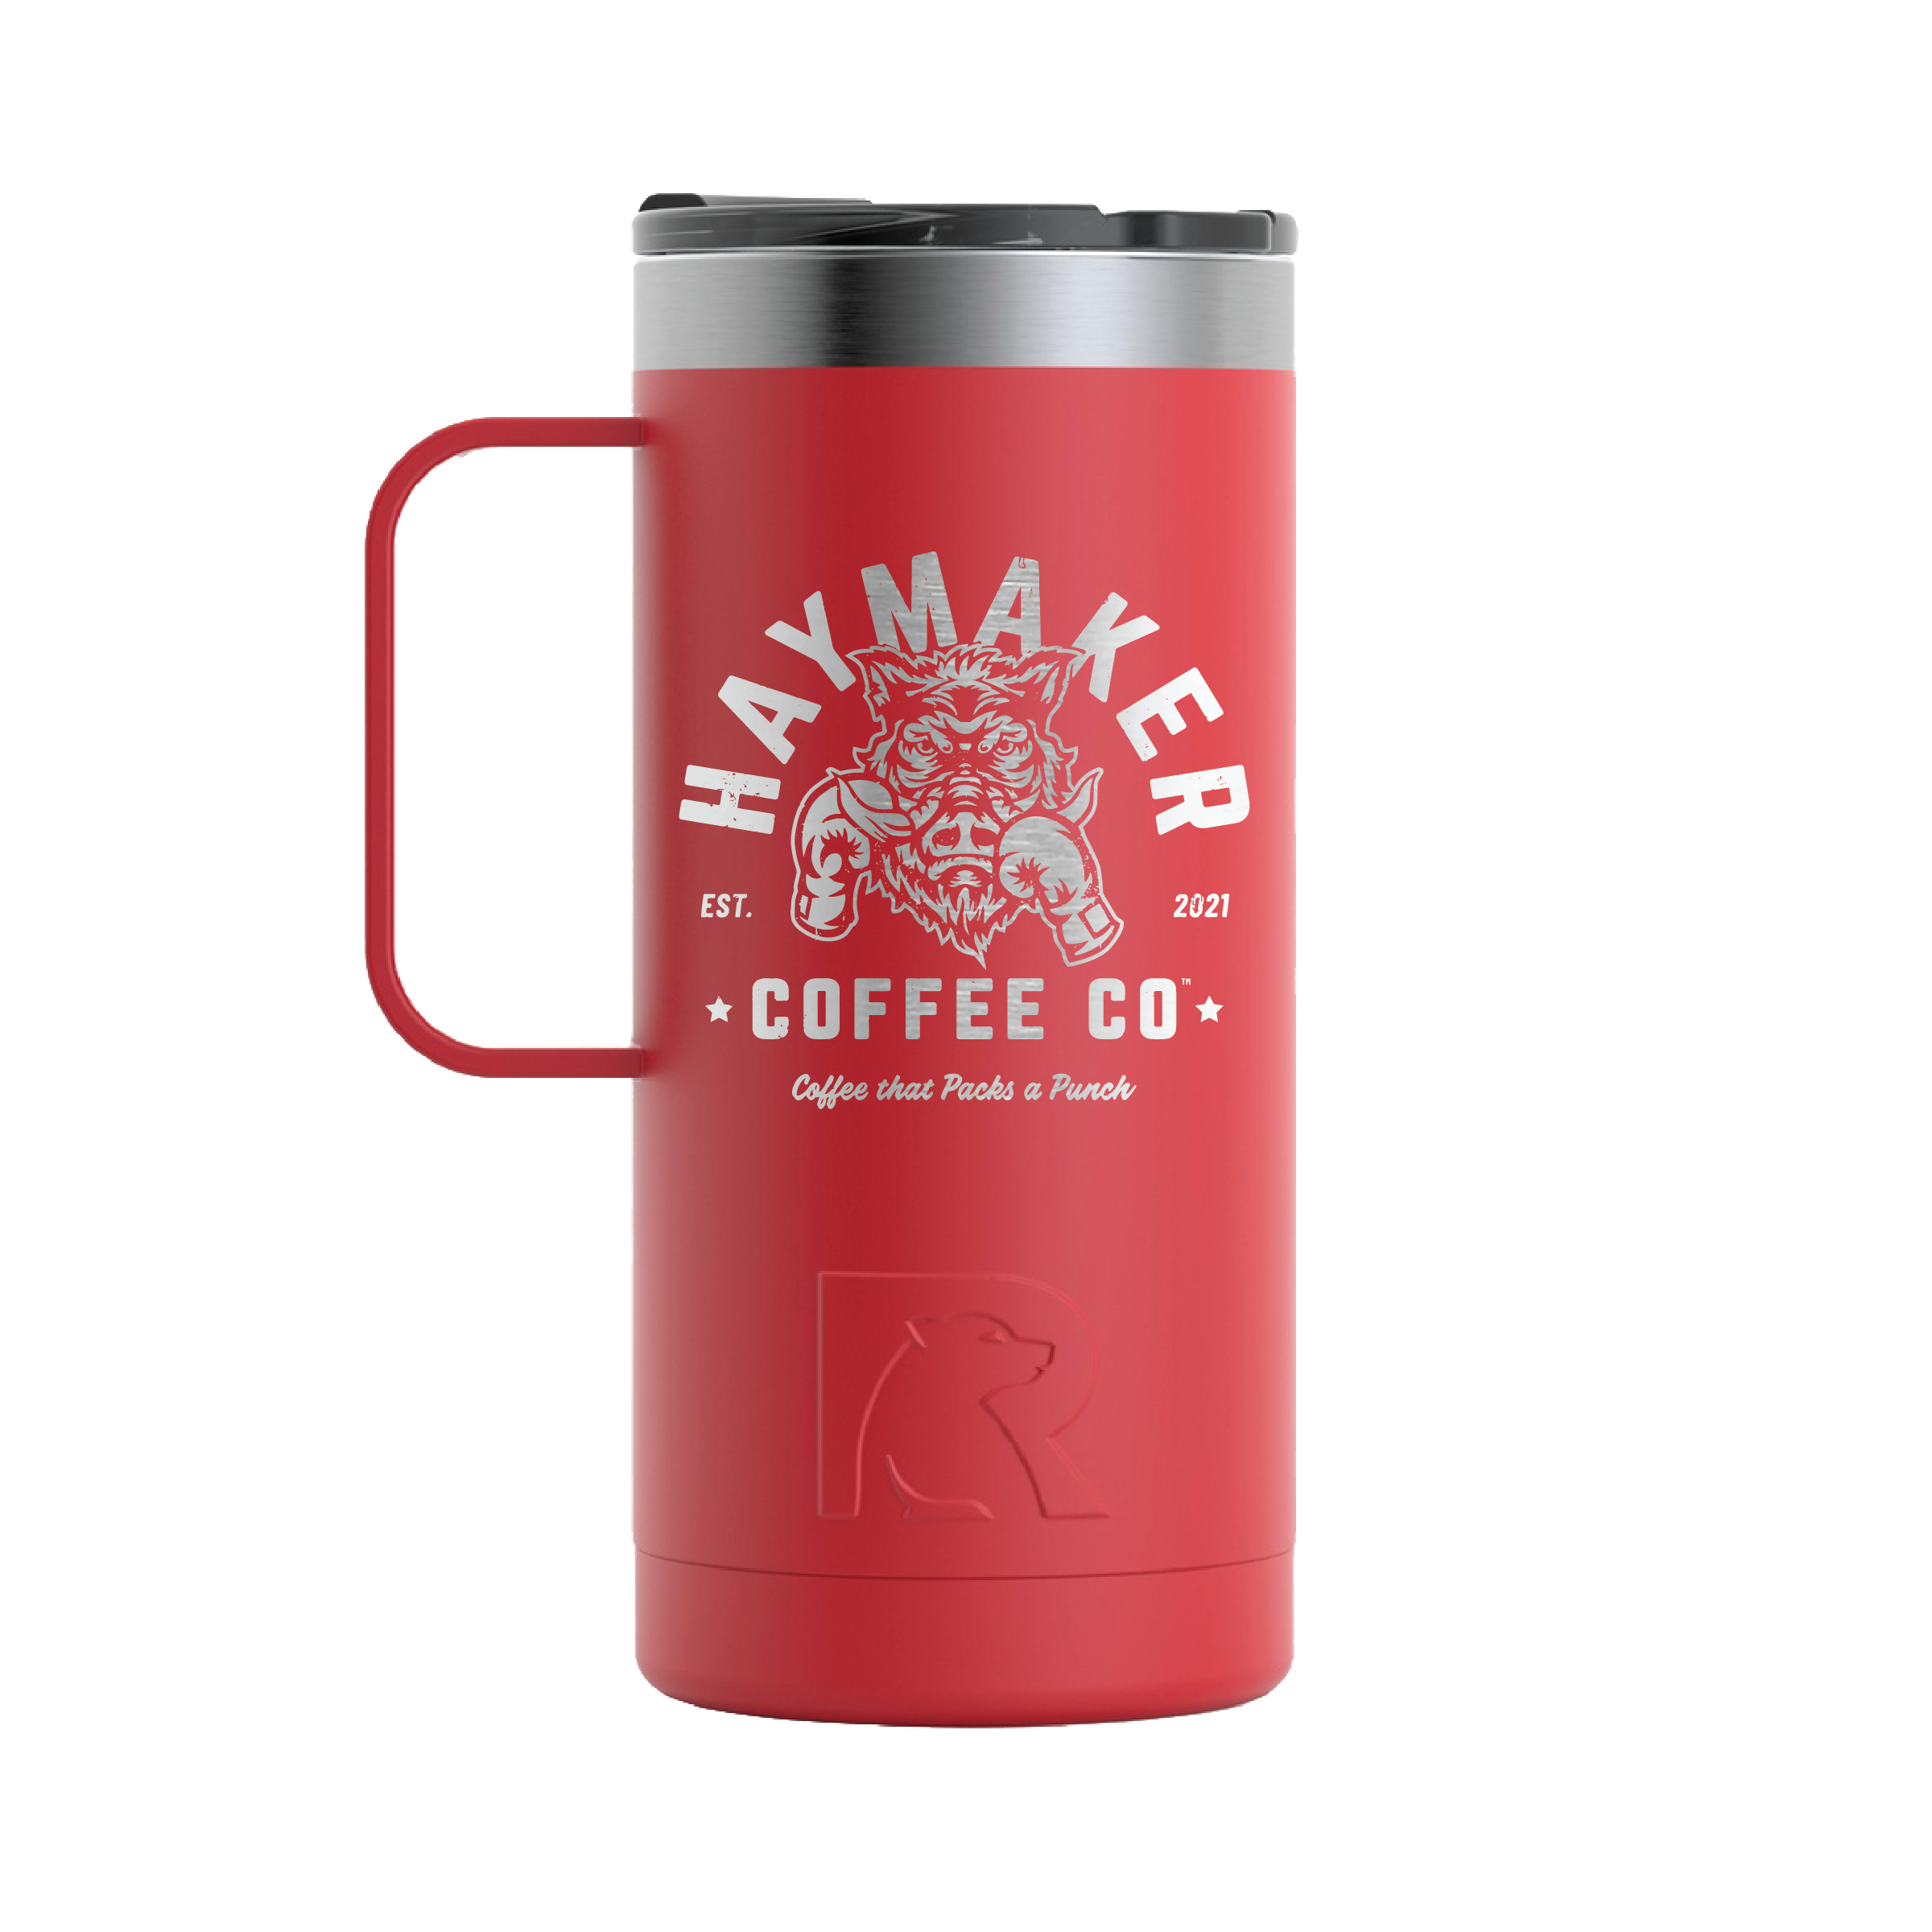 https://www.haymakercoffeeco.com/Shared/Images/Product/Haymaker-RTIC-Travel-Mug-16-oz/Haymaker-Coffee-Co-Boar-Cardinal-16ozTM-Engraved-Proof-1-OPT.png